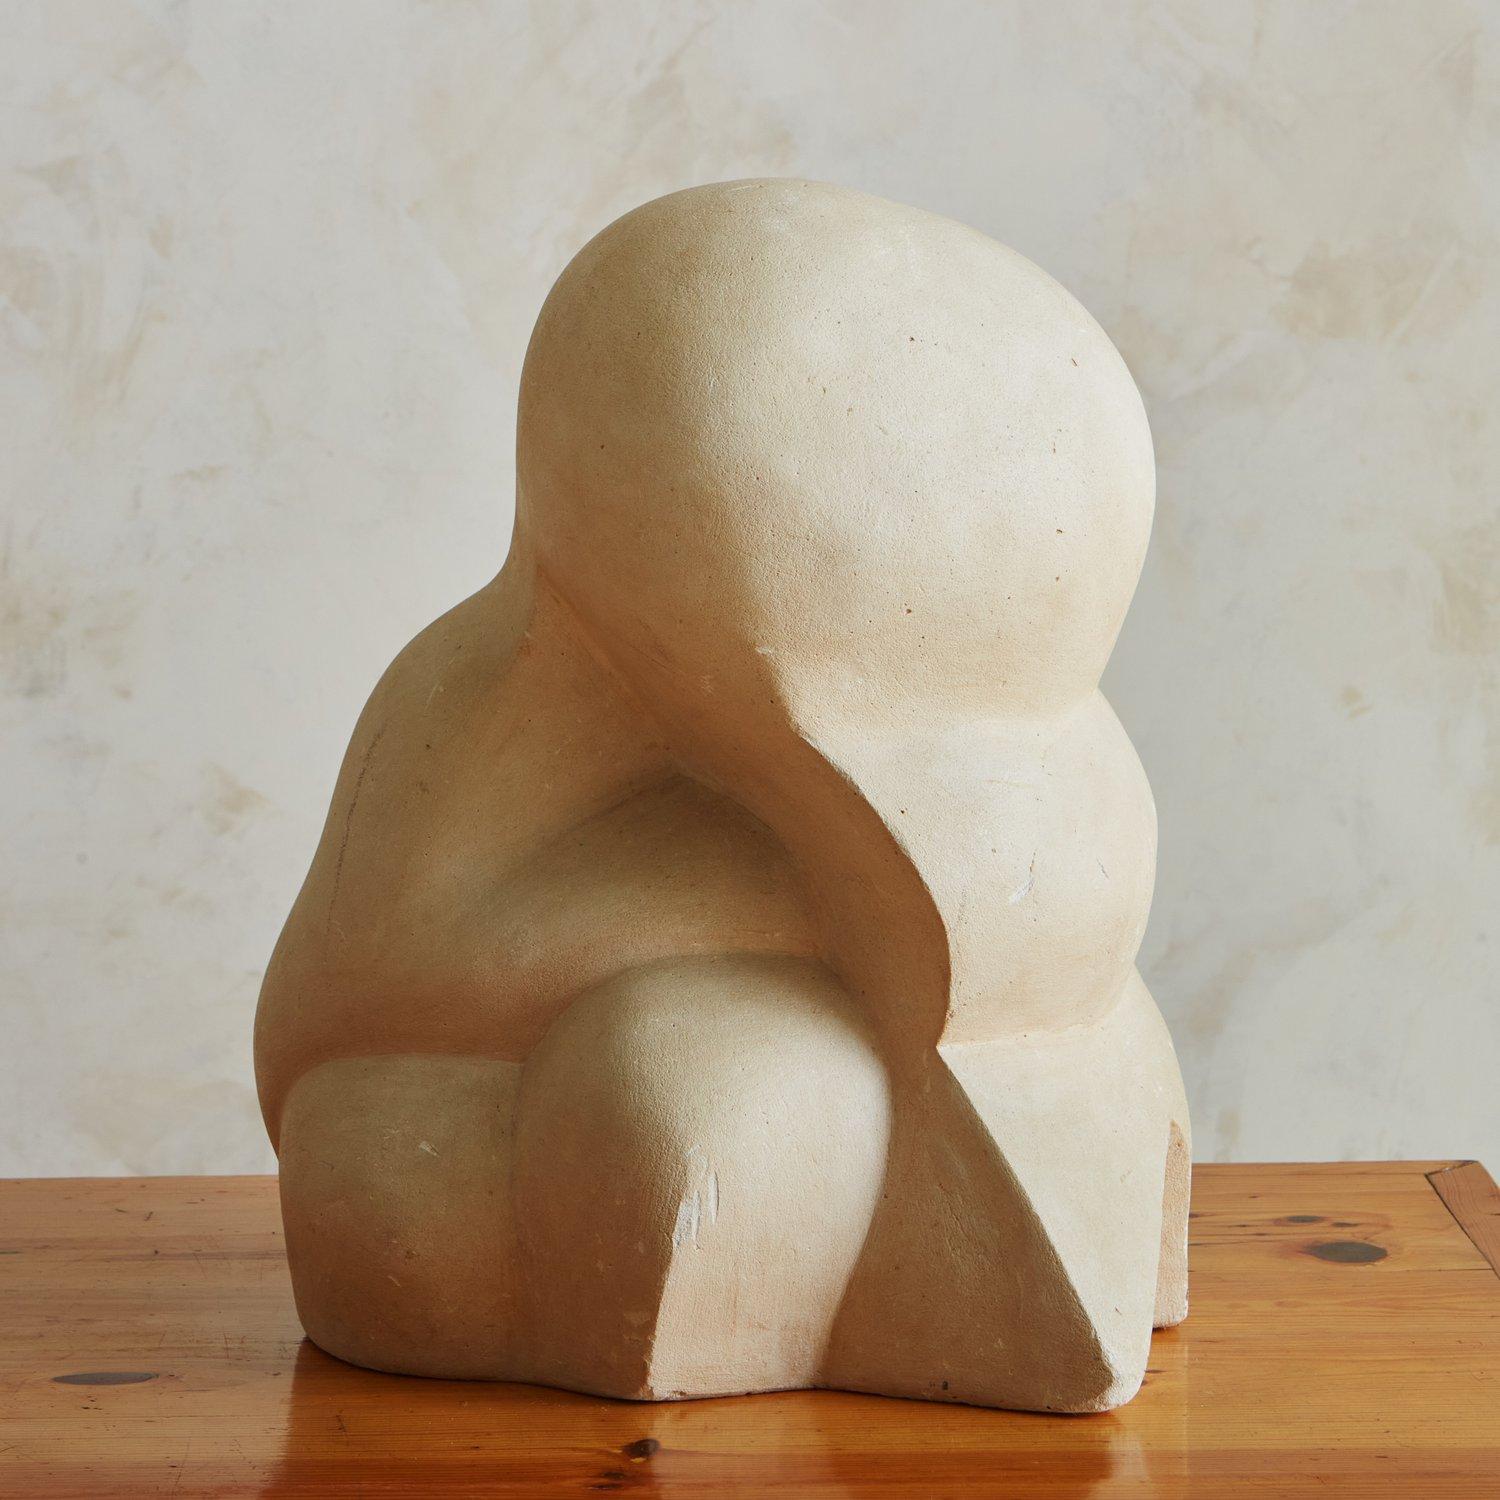 A handmade abstract plaster sculpture sourced in France featuring a beautiful, porous finish. We love the classic form and humble materiality of this timeless piece. Unsigned, 1970s.